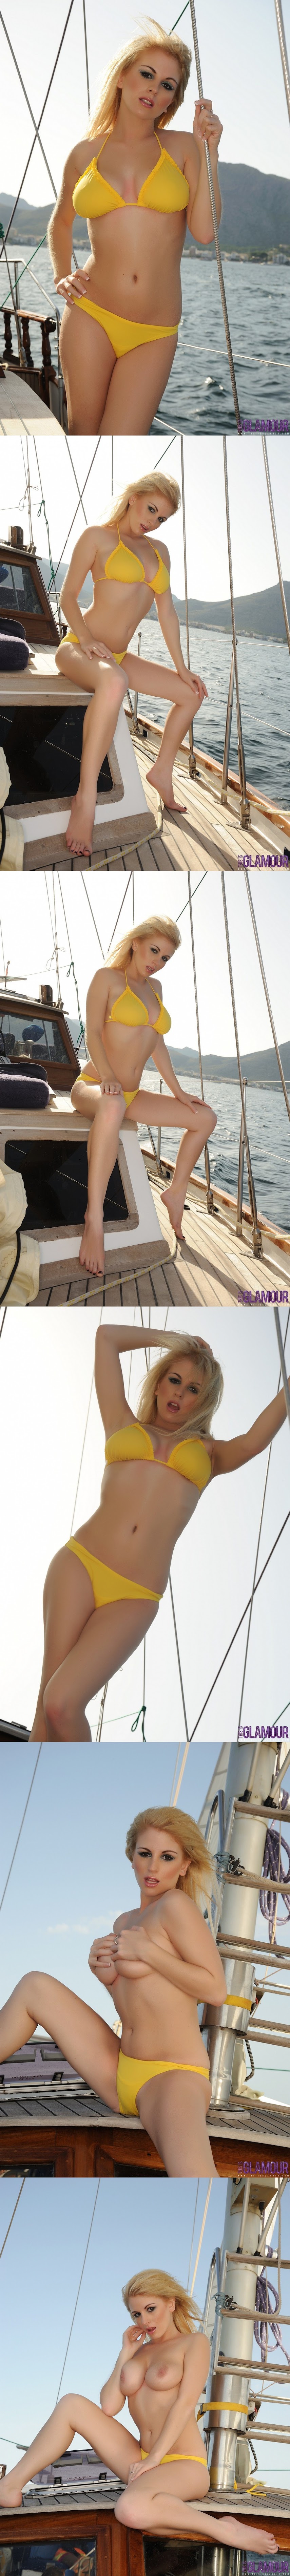 Zoe Stollery Sets Sail In A Canary Yellow Bikini Zoe_Stollery_And_Amy_Lu_Bare_Their_Essentials.zip-jk-